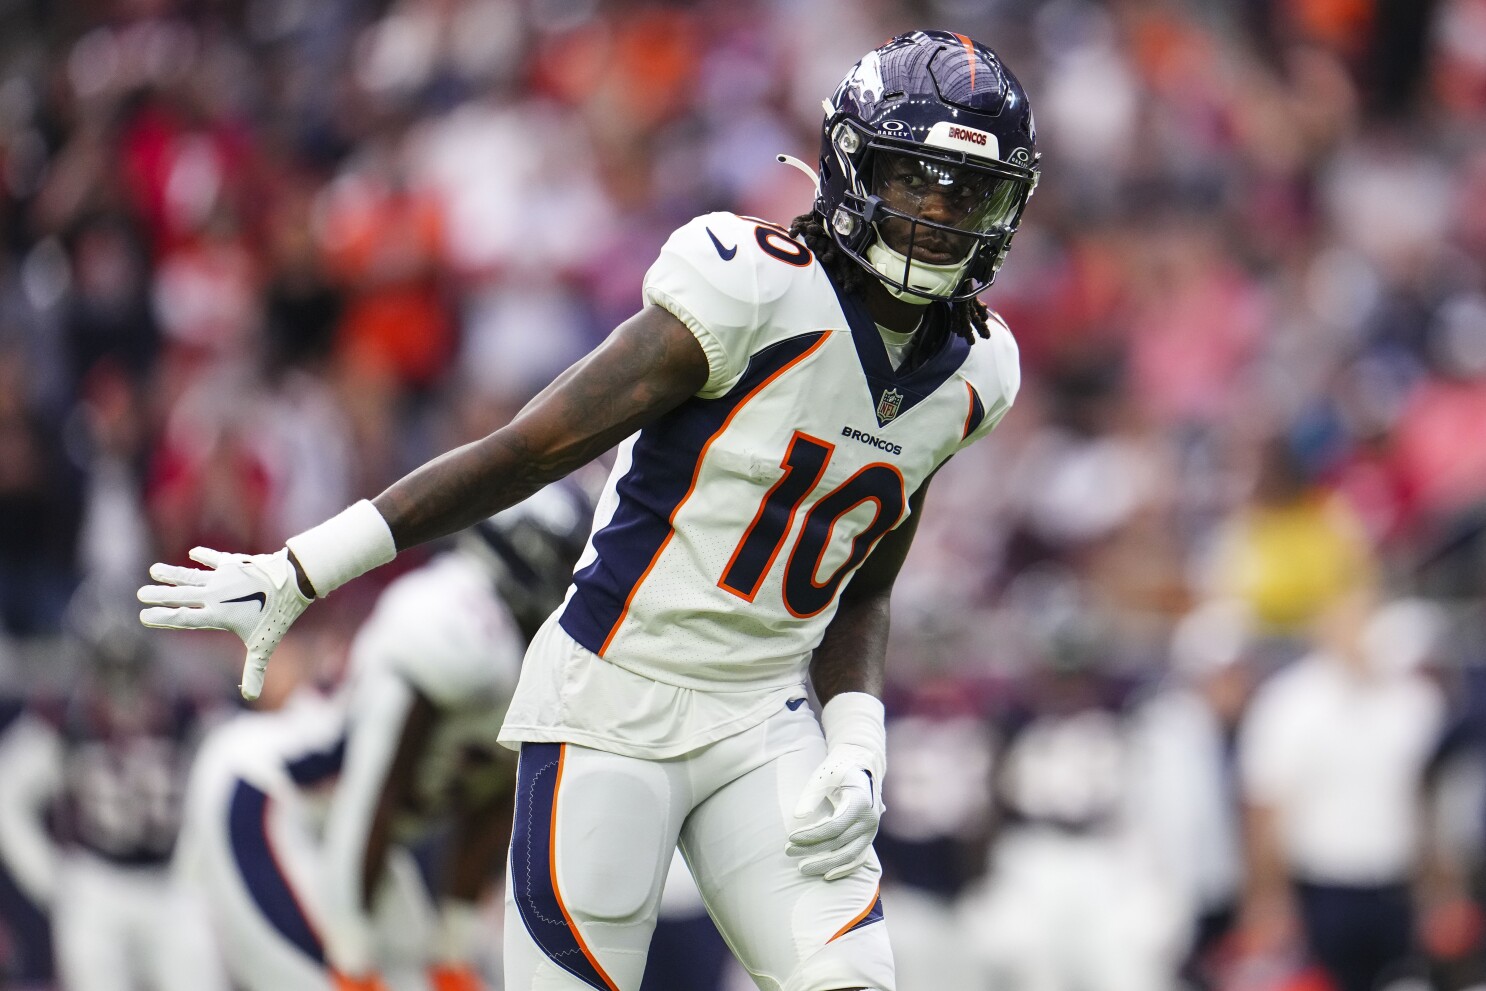  NFL Shakeup: How Jerry Jeudy's Huge Contract Deal Sparks New Hopes for Star Receivers